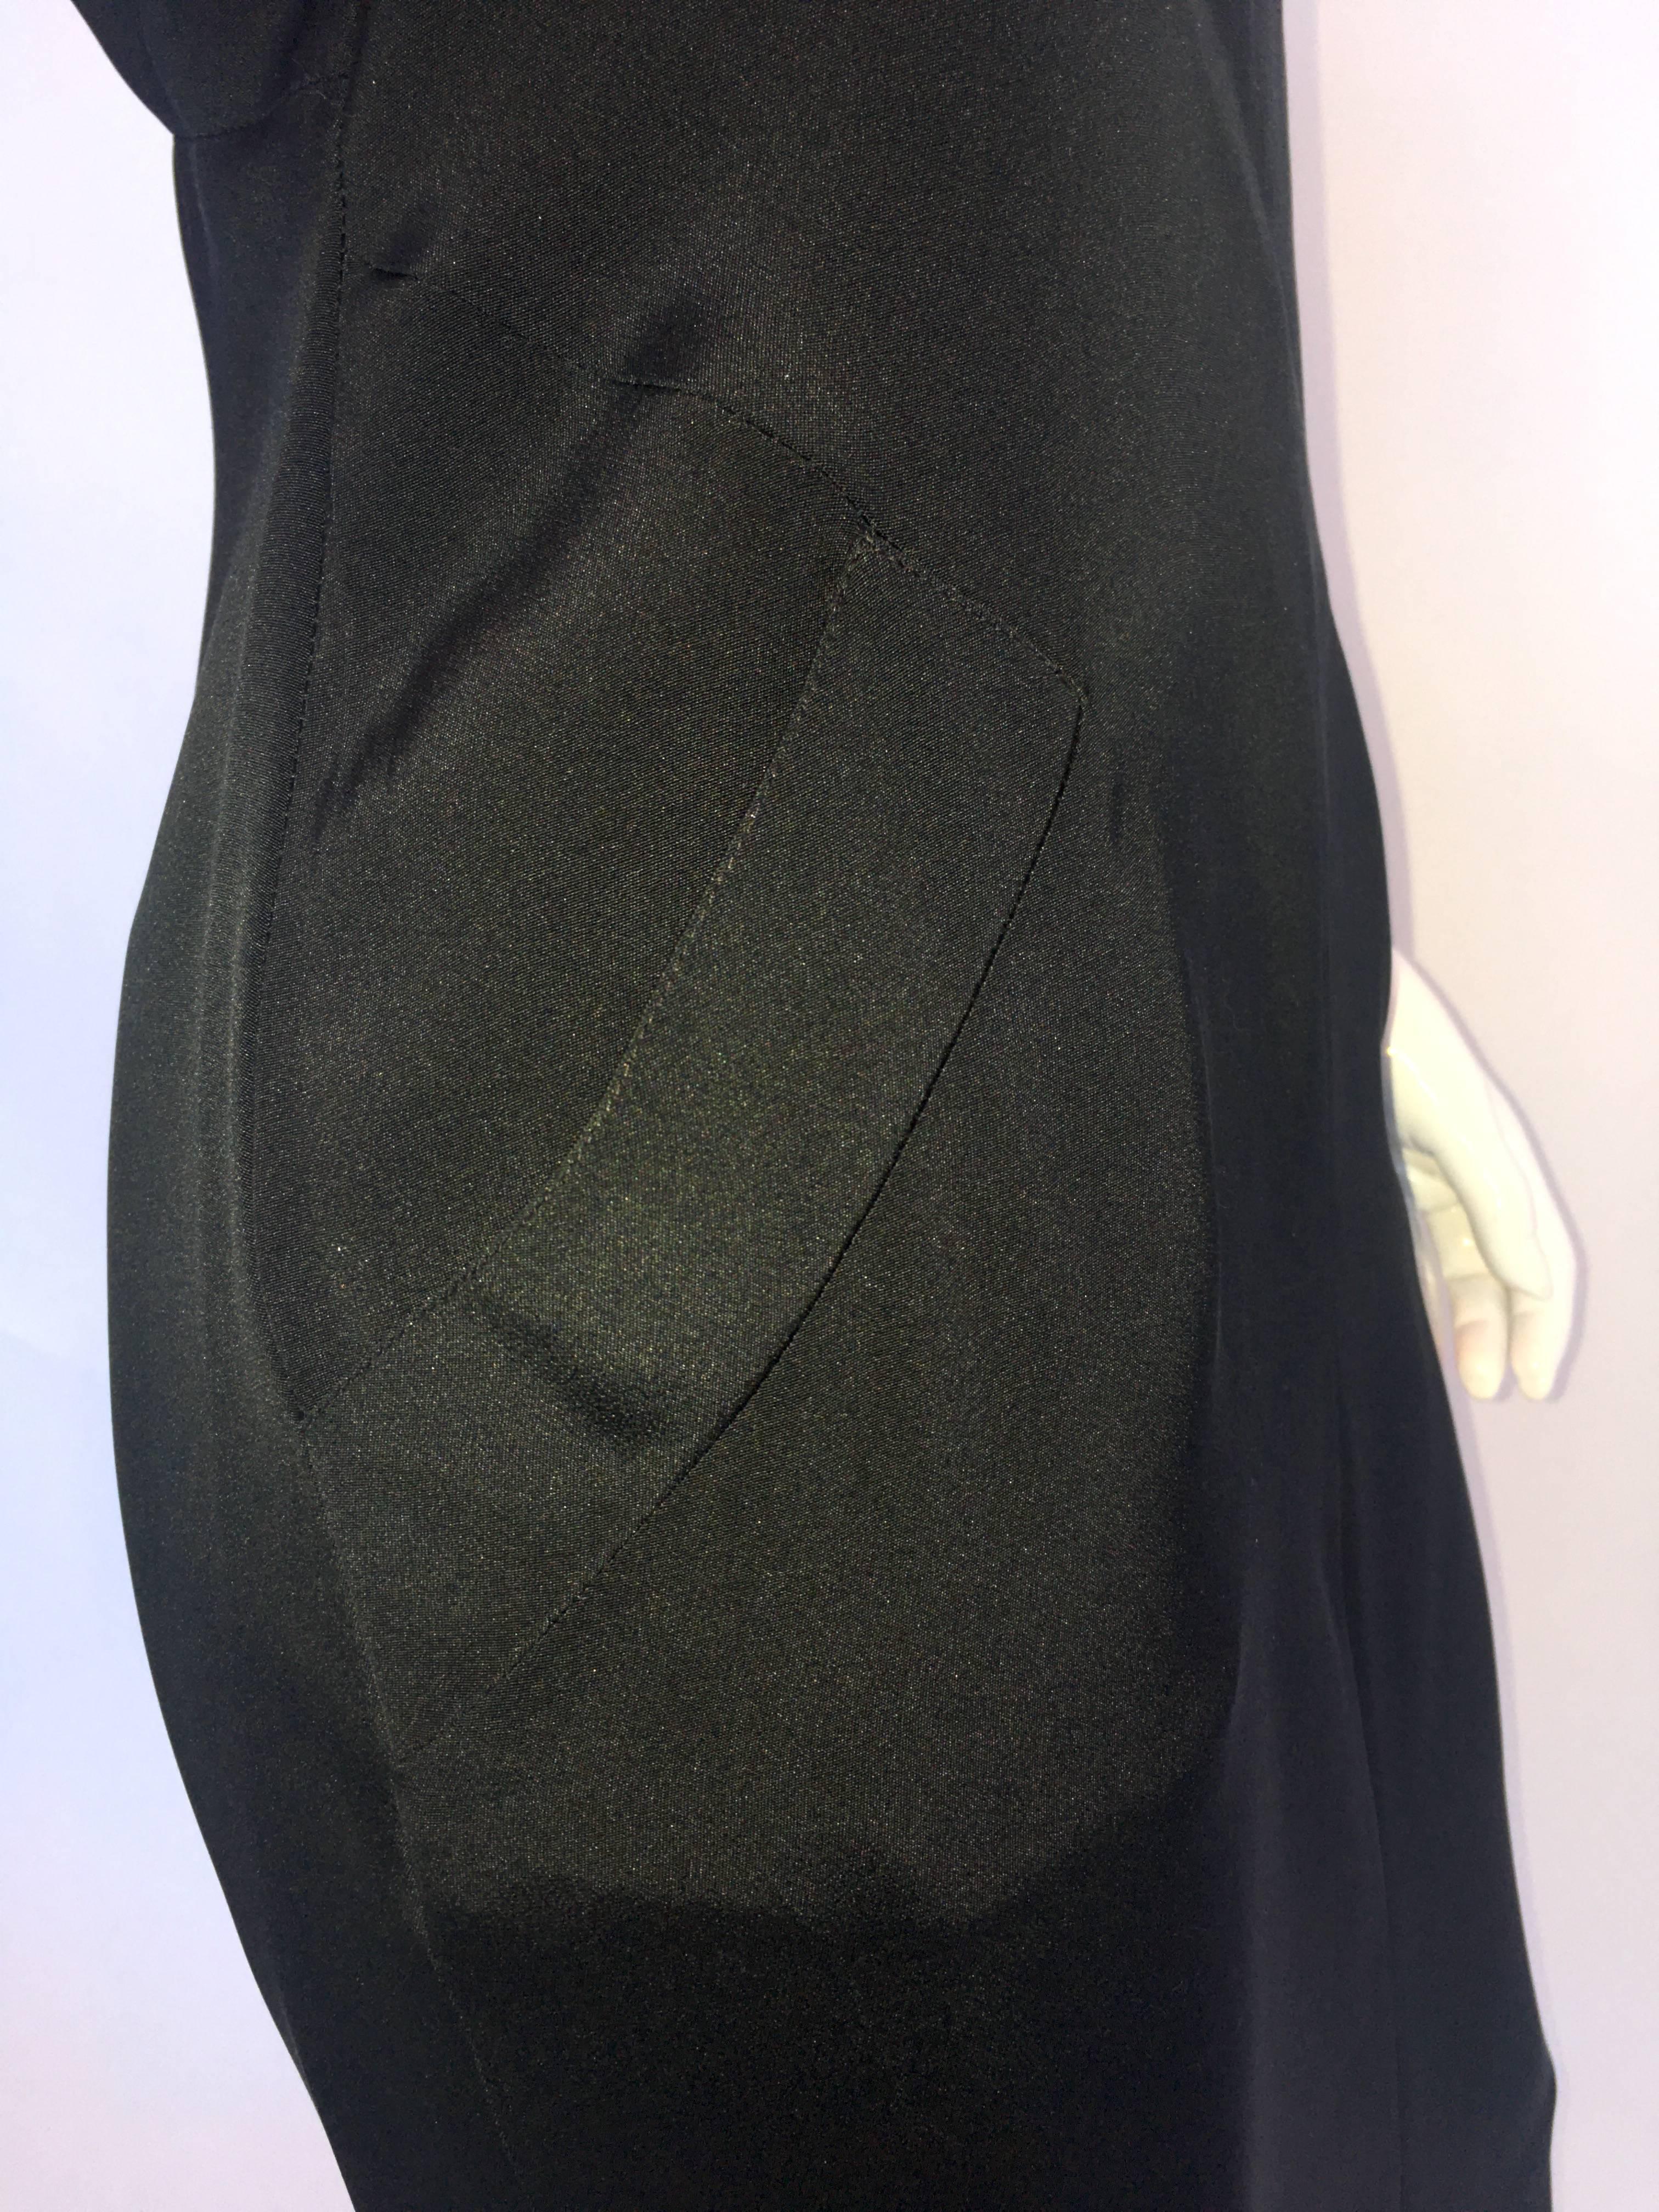 Karl Lagerfeld Black Halter High Neck Dress with two front pockets 
Skirt has back slit.

Size Label - 40 
Neck opening - Circumference 13 1/2 in.

Measured Flat:
Bust - 15 in.
Front Neck to bottom hem - 40 in. 
Hips - 18 1/2 in.
Back slit - 7 1/2